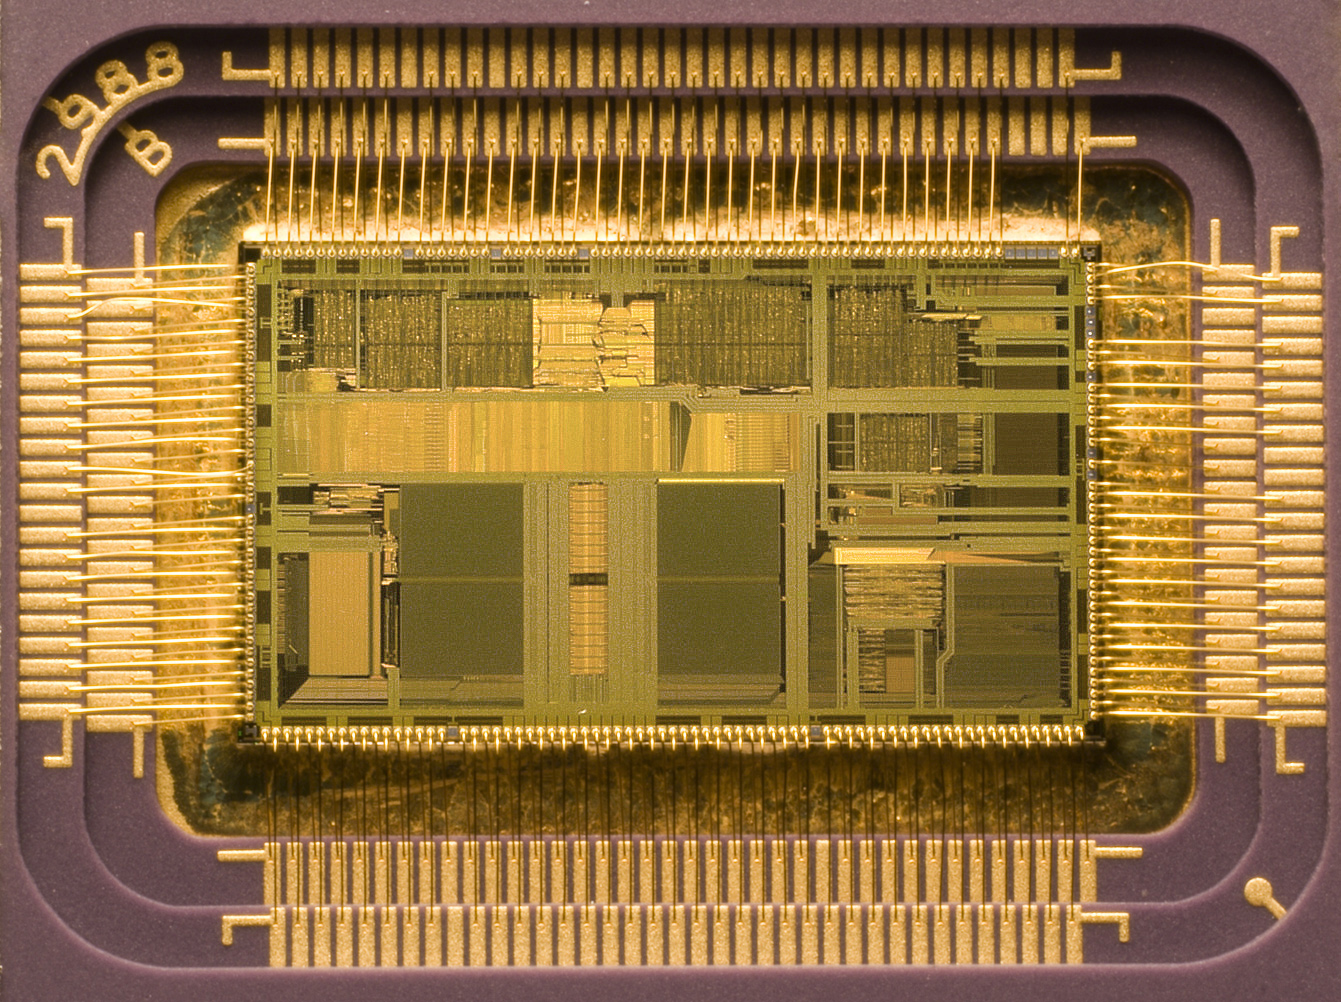 Architecture of the central processing unit (CPU) - Computer